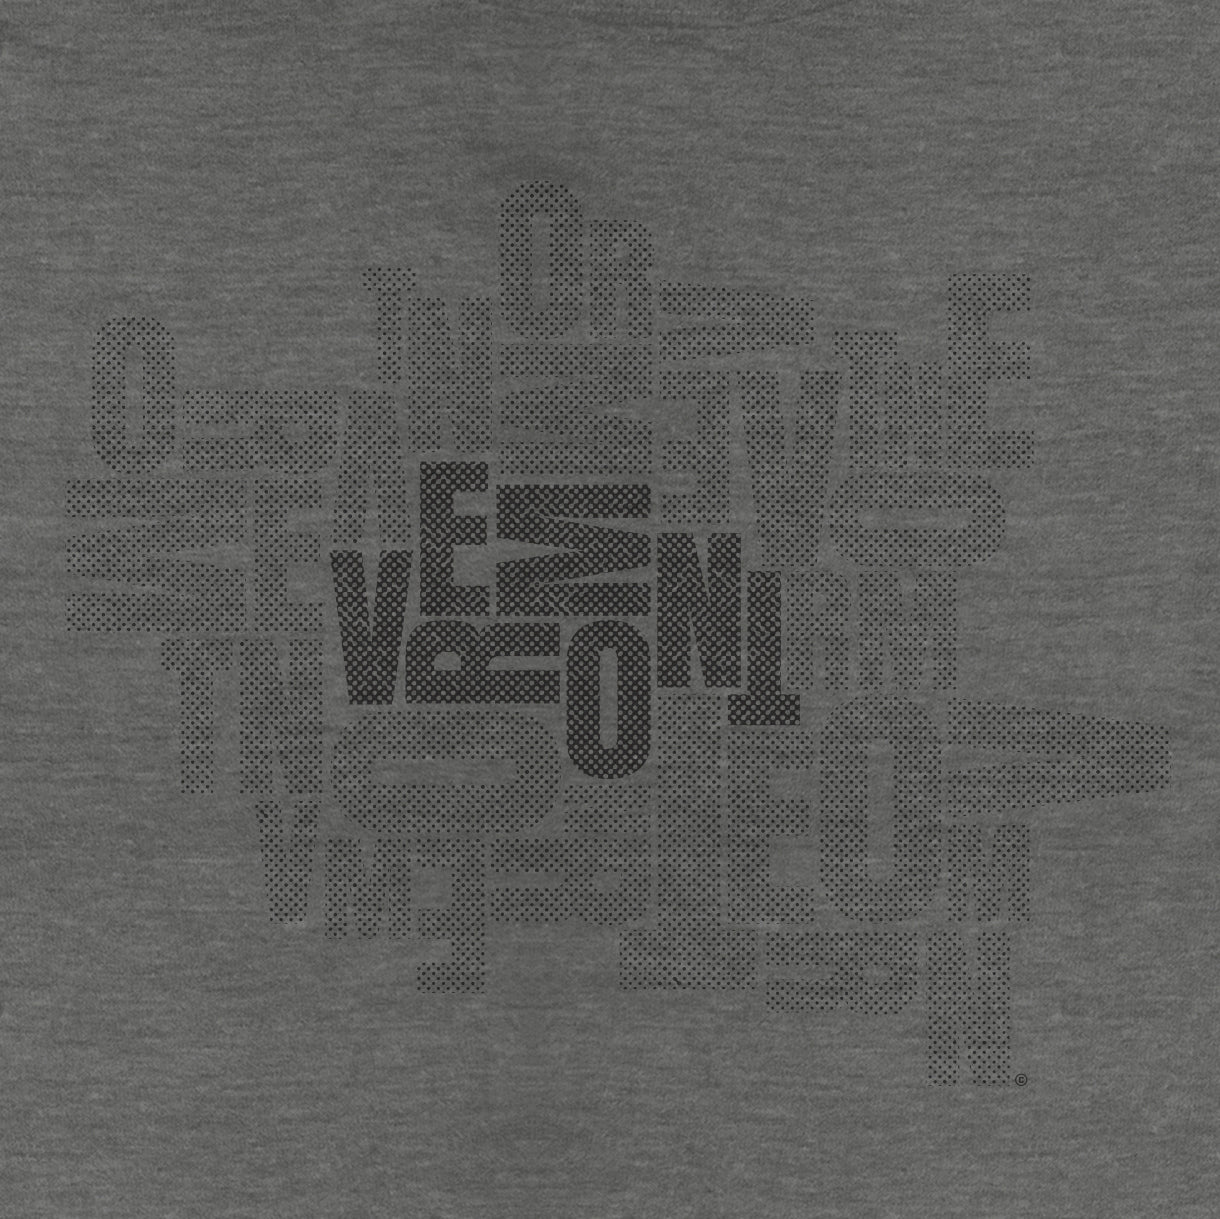 Close up of Vermont type design in black on grey shirt